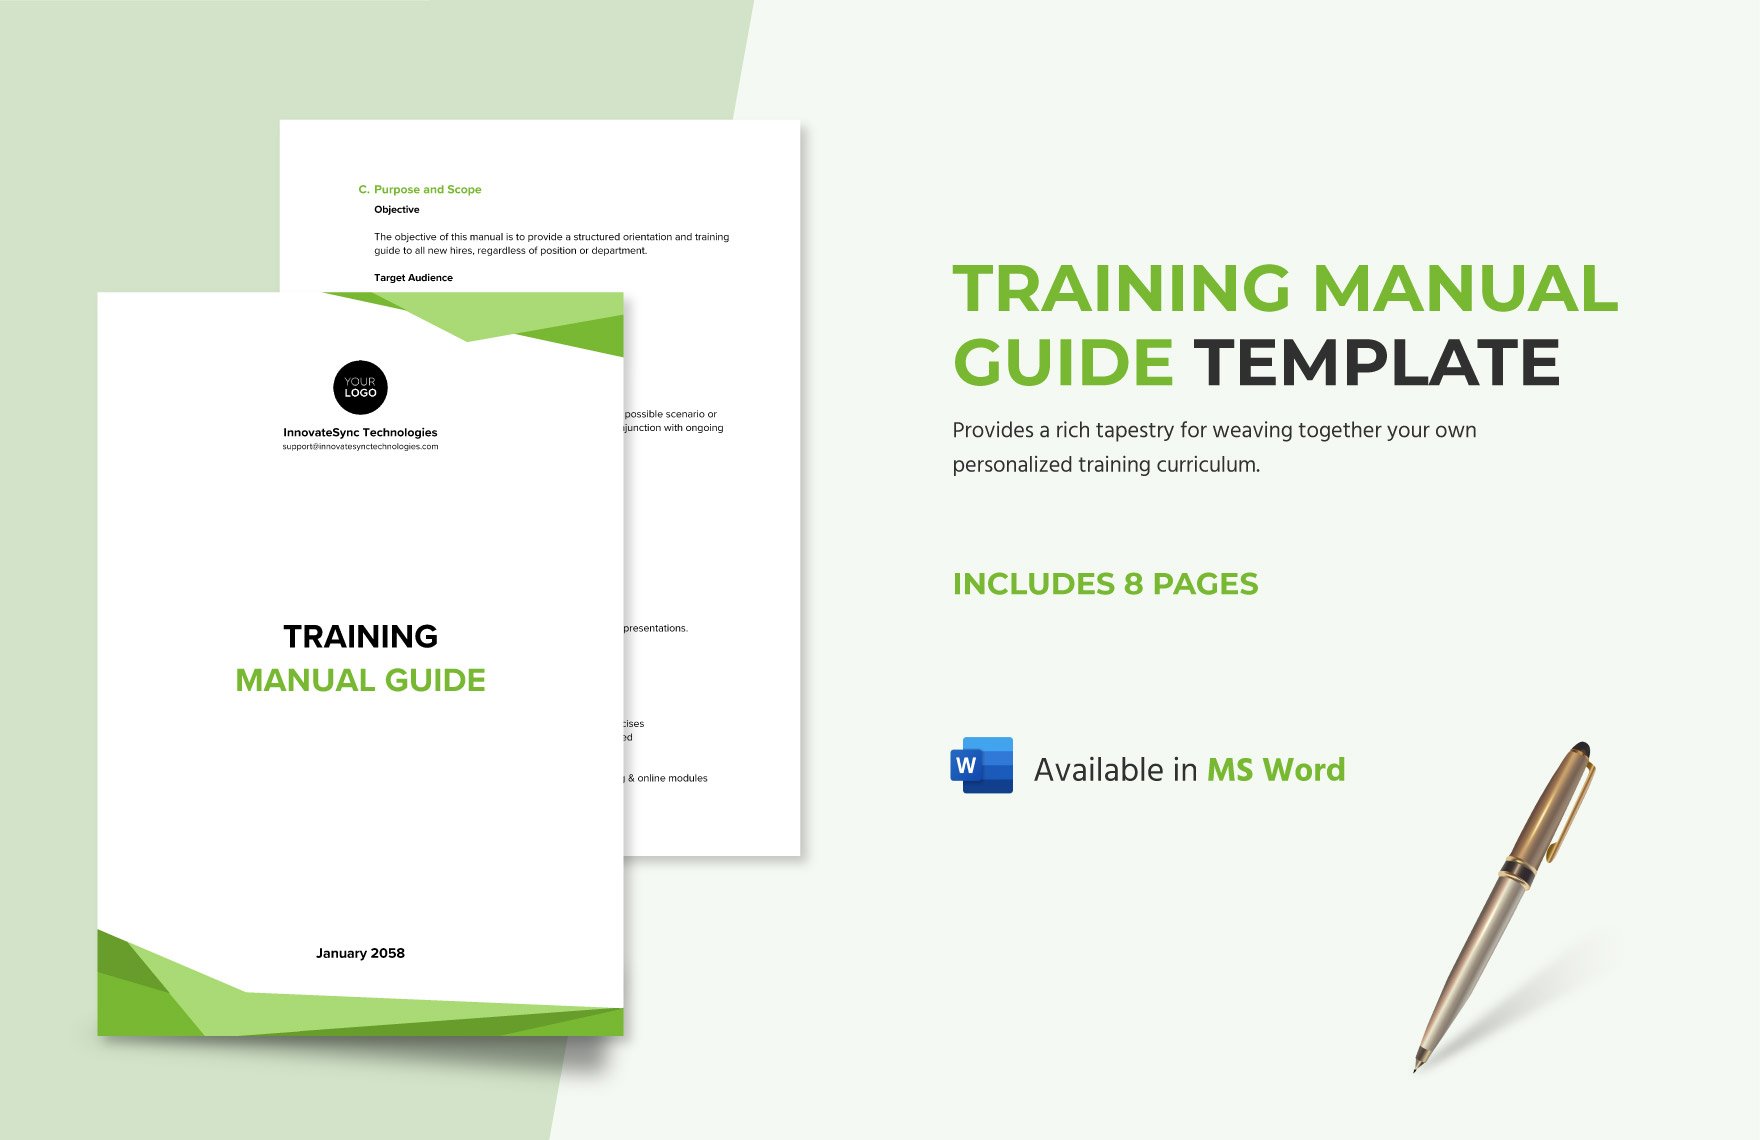 Free Training Manual Guide Template in Word